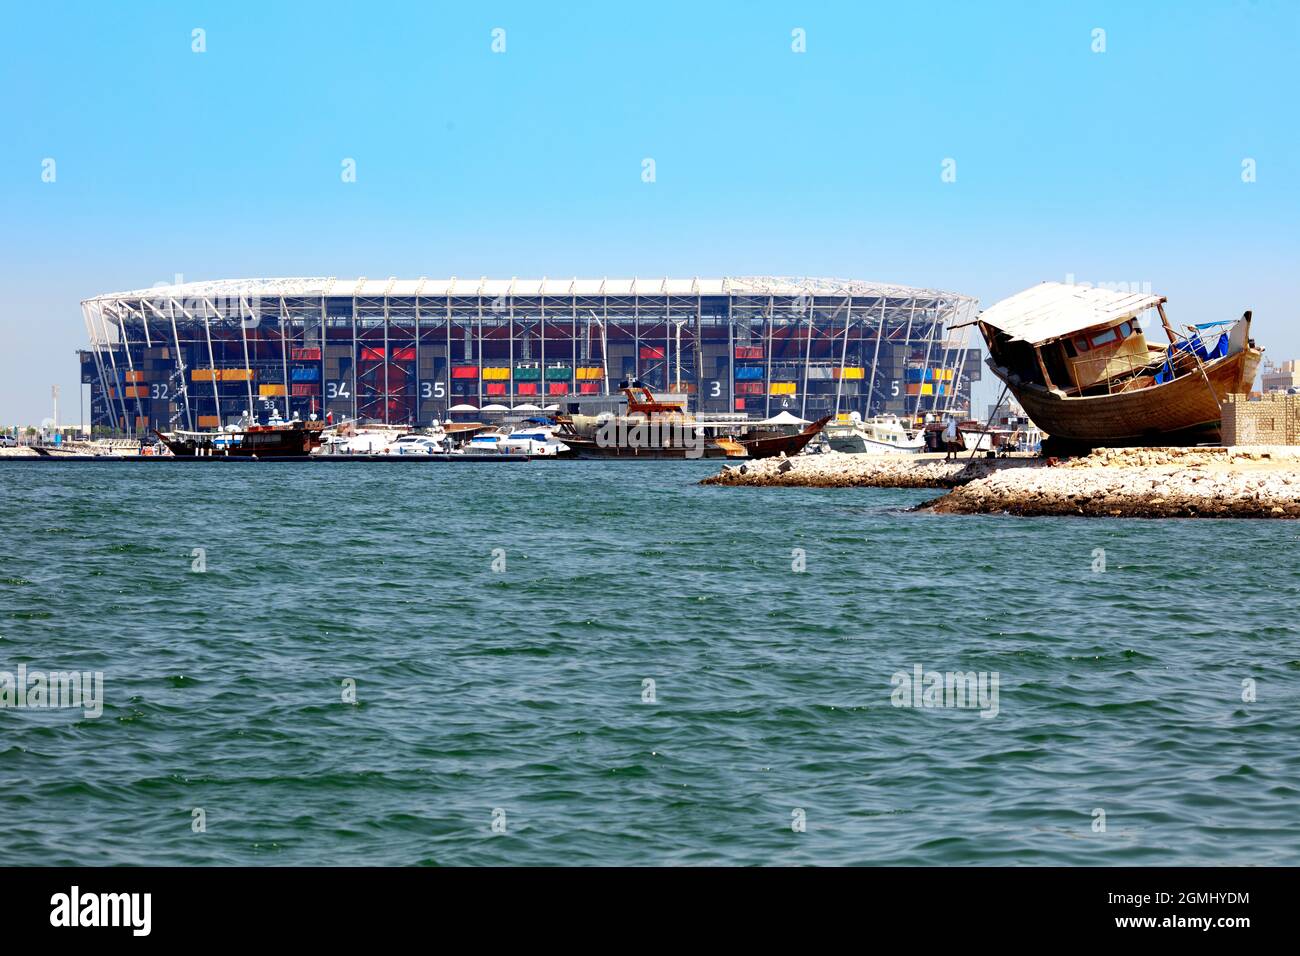 Stadium 974, previously known as Ras Abu Aboud Stadium, is football stadium which is built in Doha, Qatar for the 2022 FIFA World Cup. Stock Photo